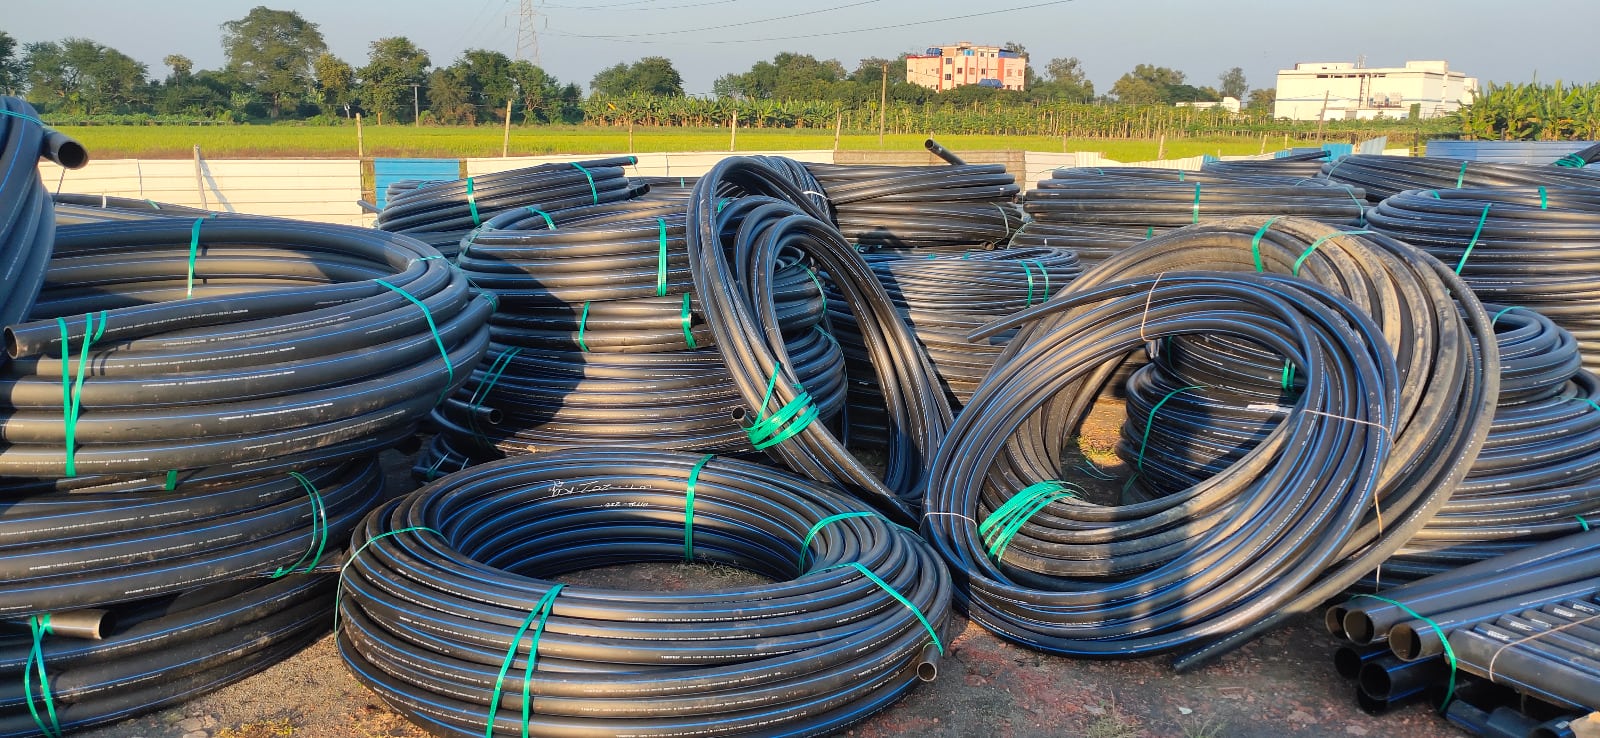 hdpe pipe suppliers in india